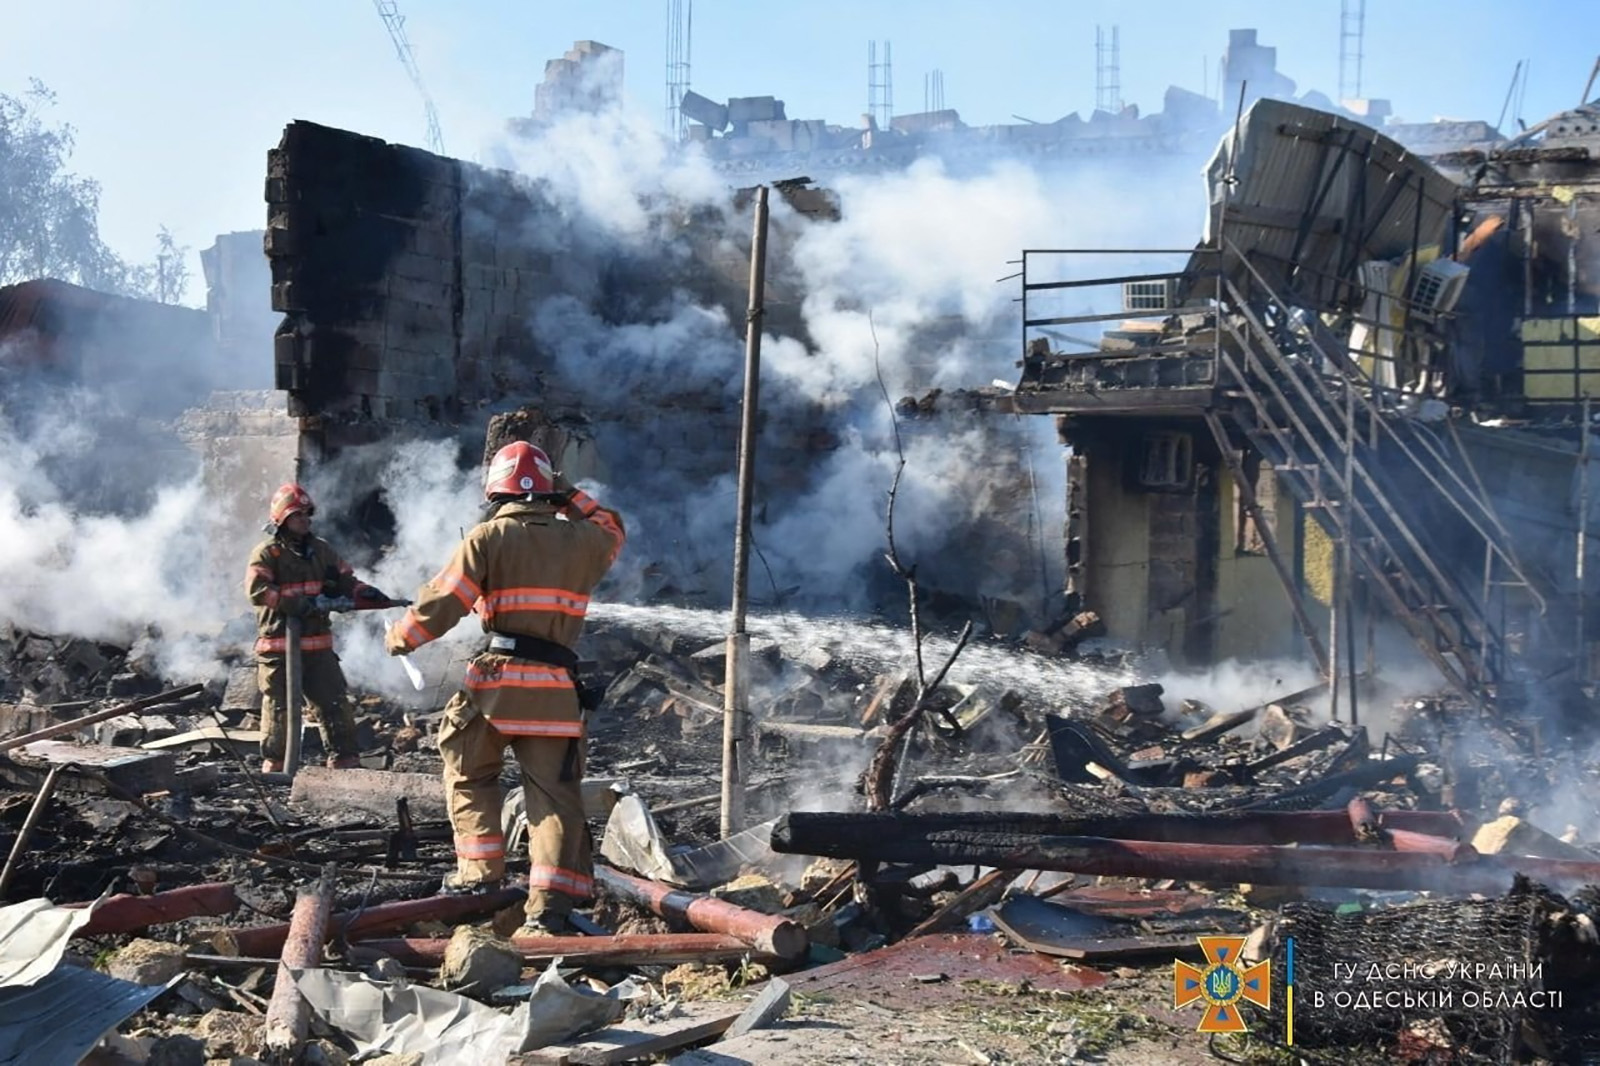 Firefighters work at site of a residential area damaged by a Russia missile strike in the settlement of Zatoka, Odesa region, Ukraine, on July 26.